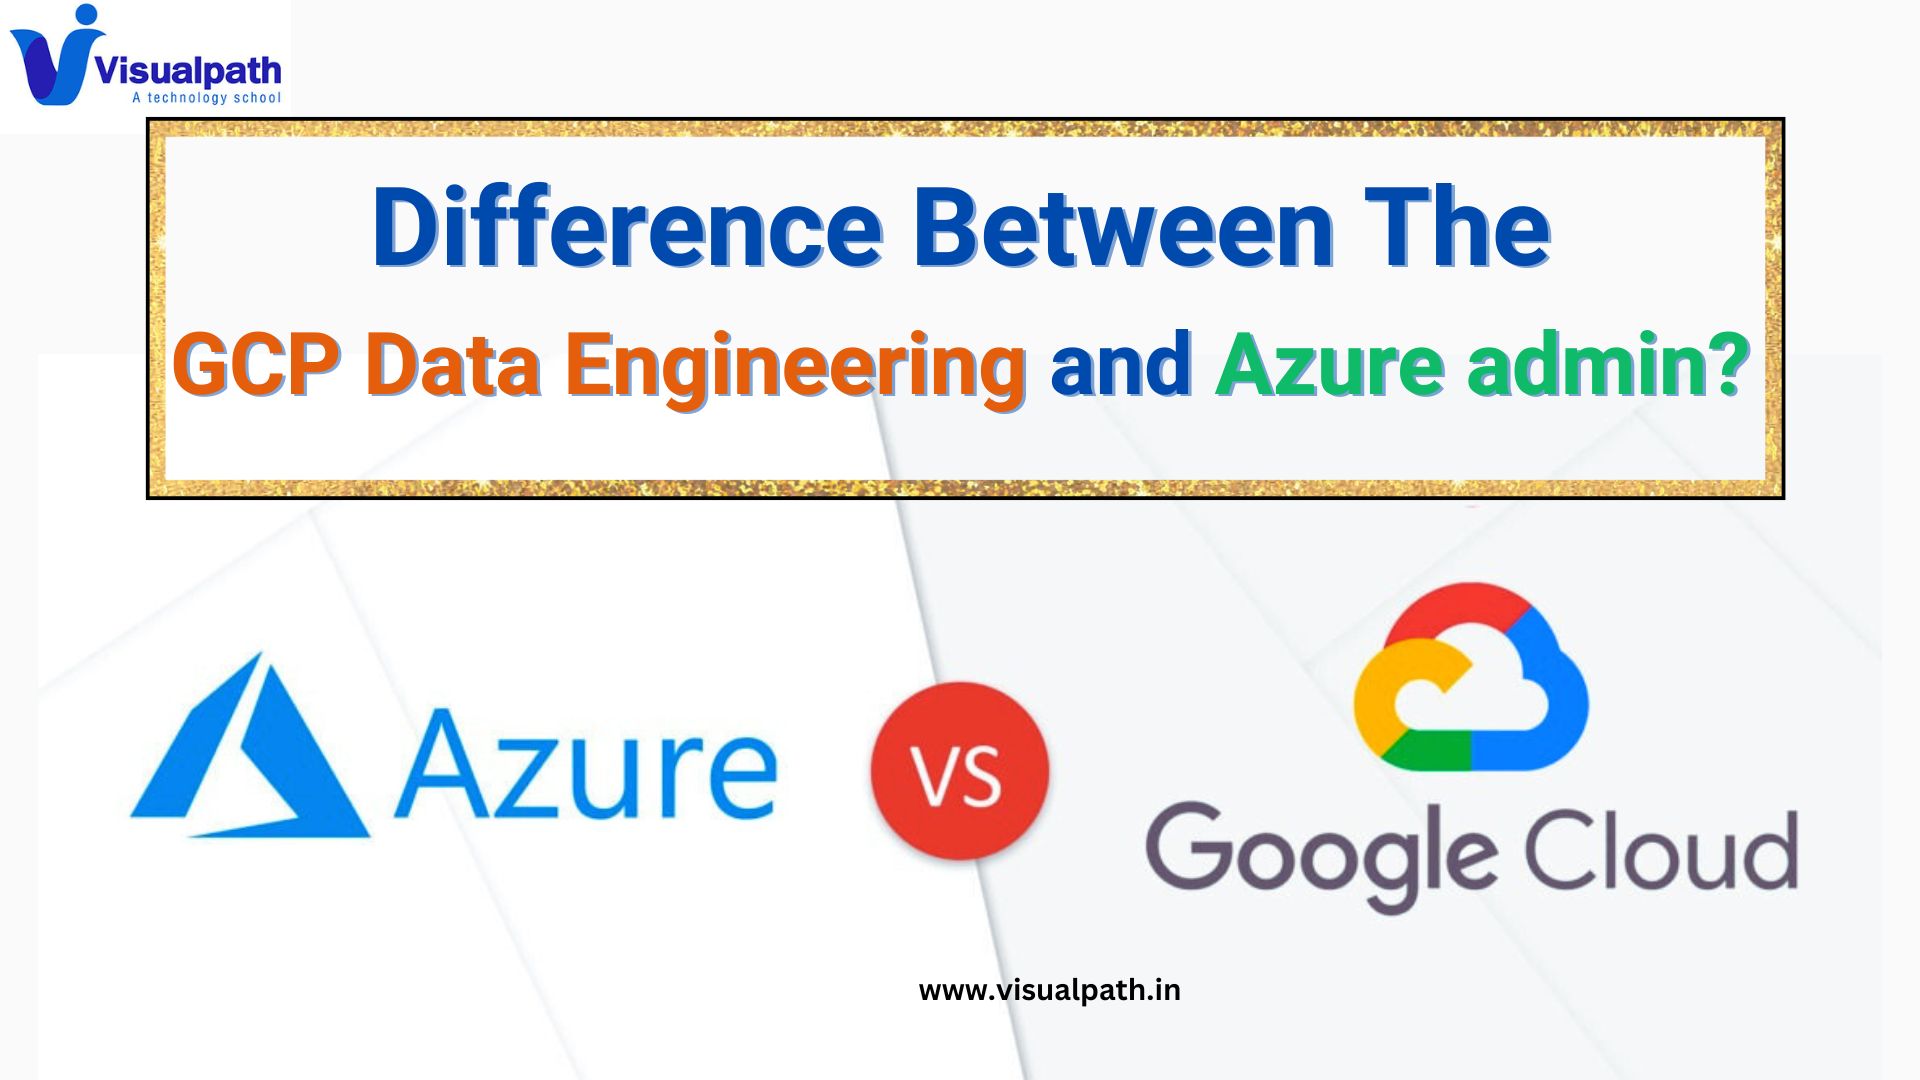 Difference between The GCP Data Engineering and Azure admin?